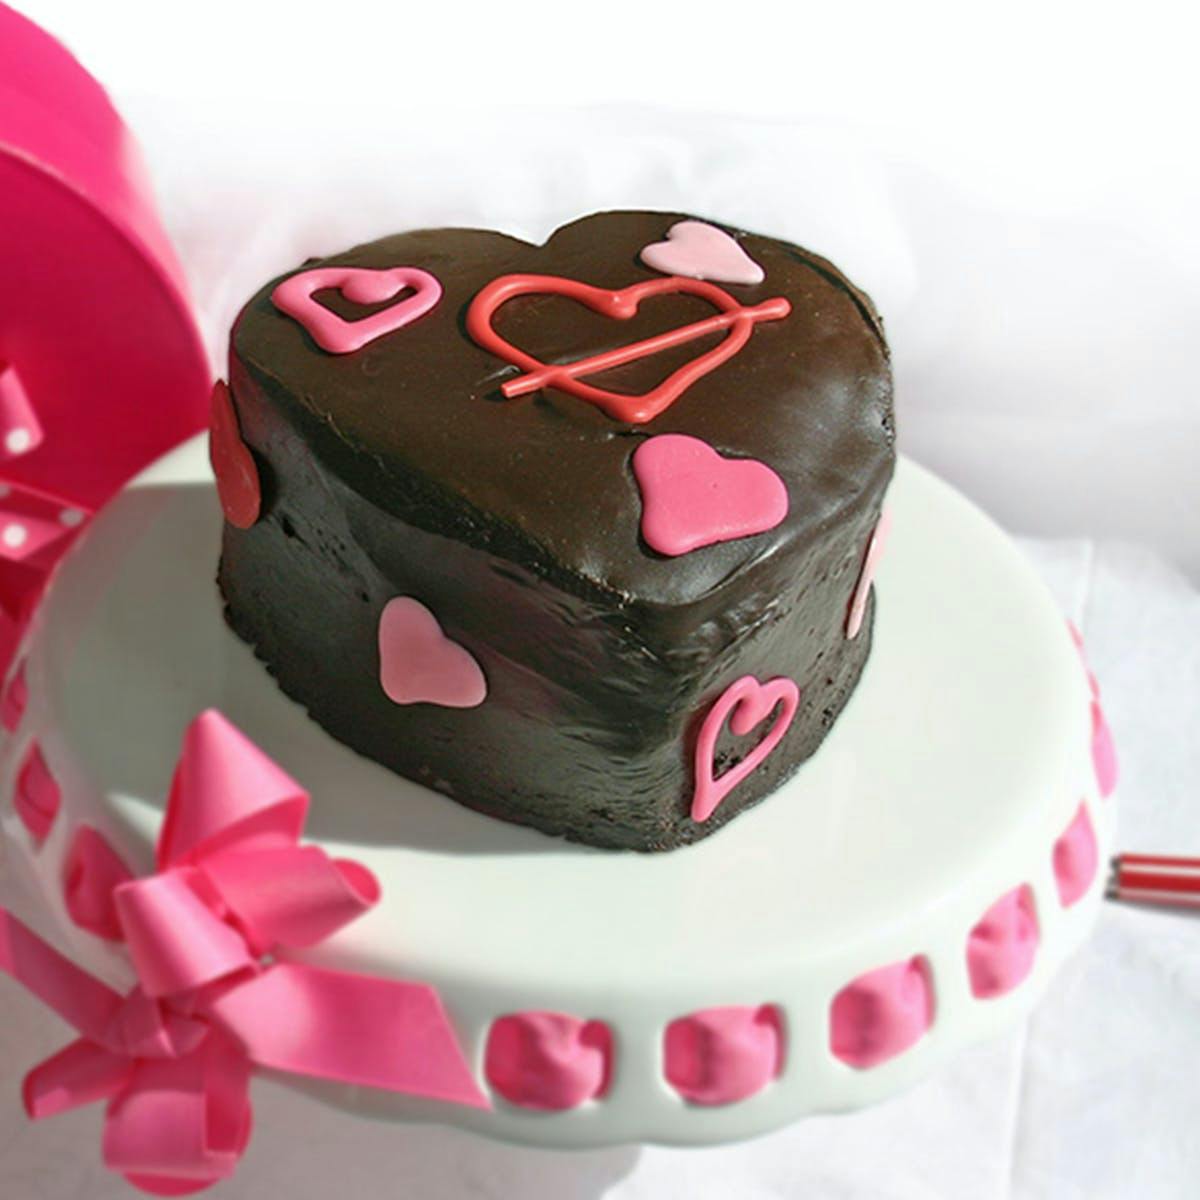 For the Love of Stripes Valentine's Day Cake | Our Baking Blog: Cake,  Cookie & Dessert Recipes by Wilton